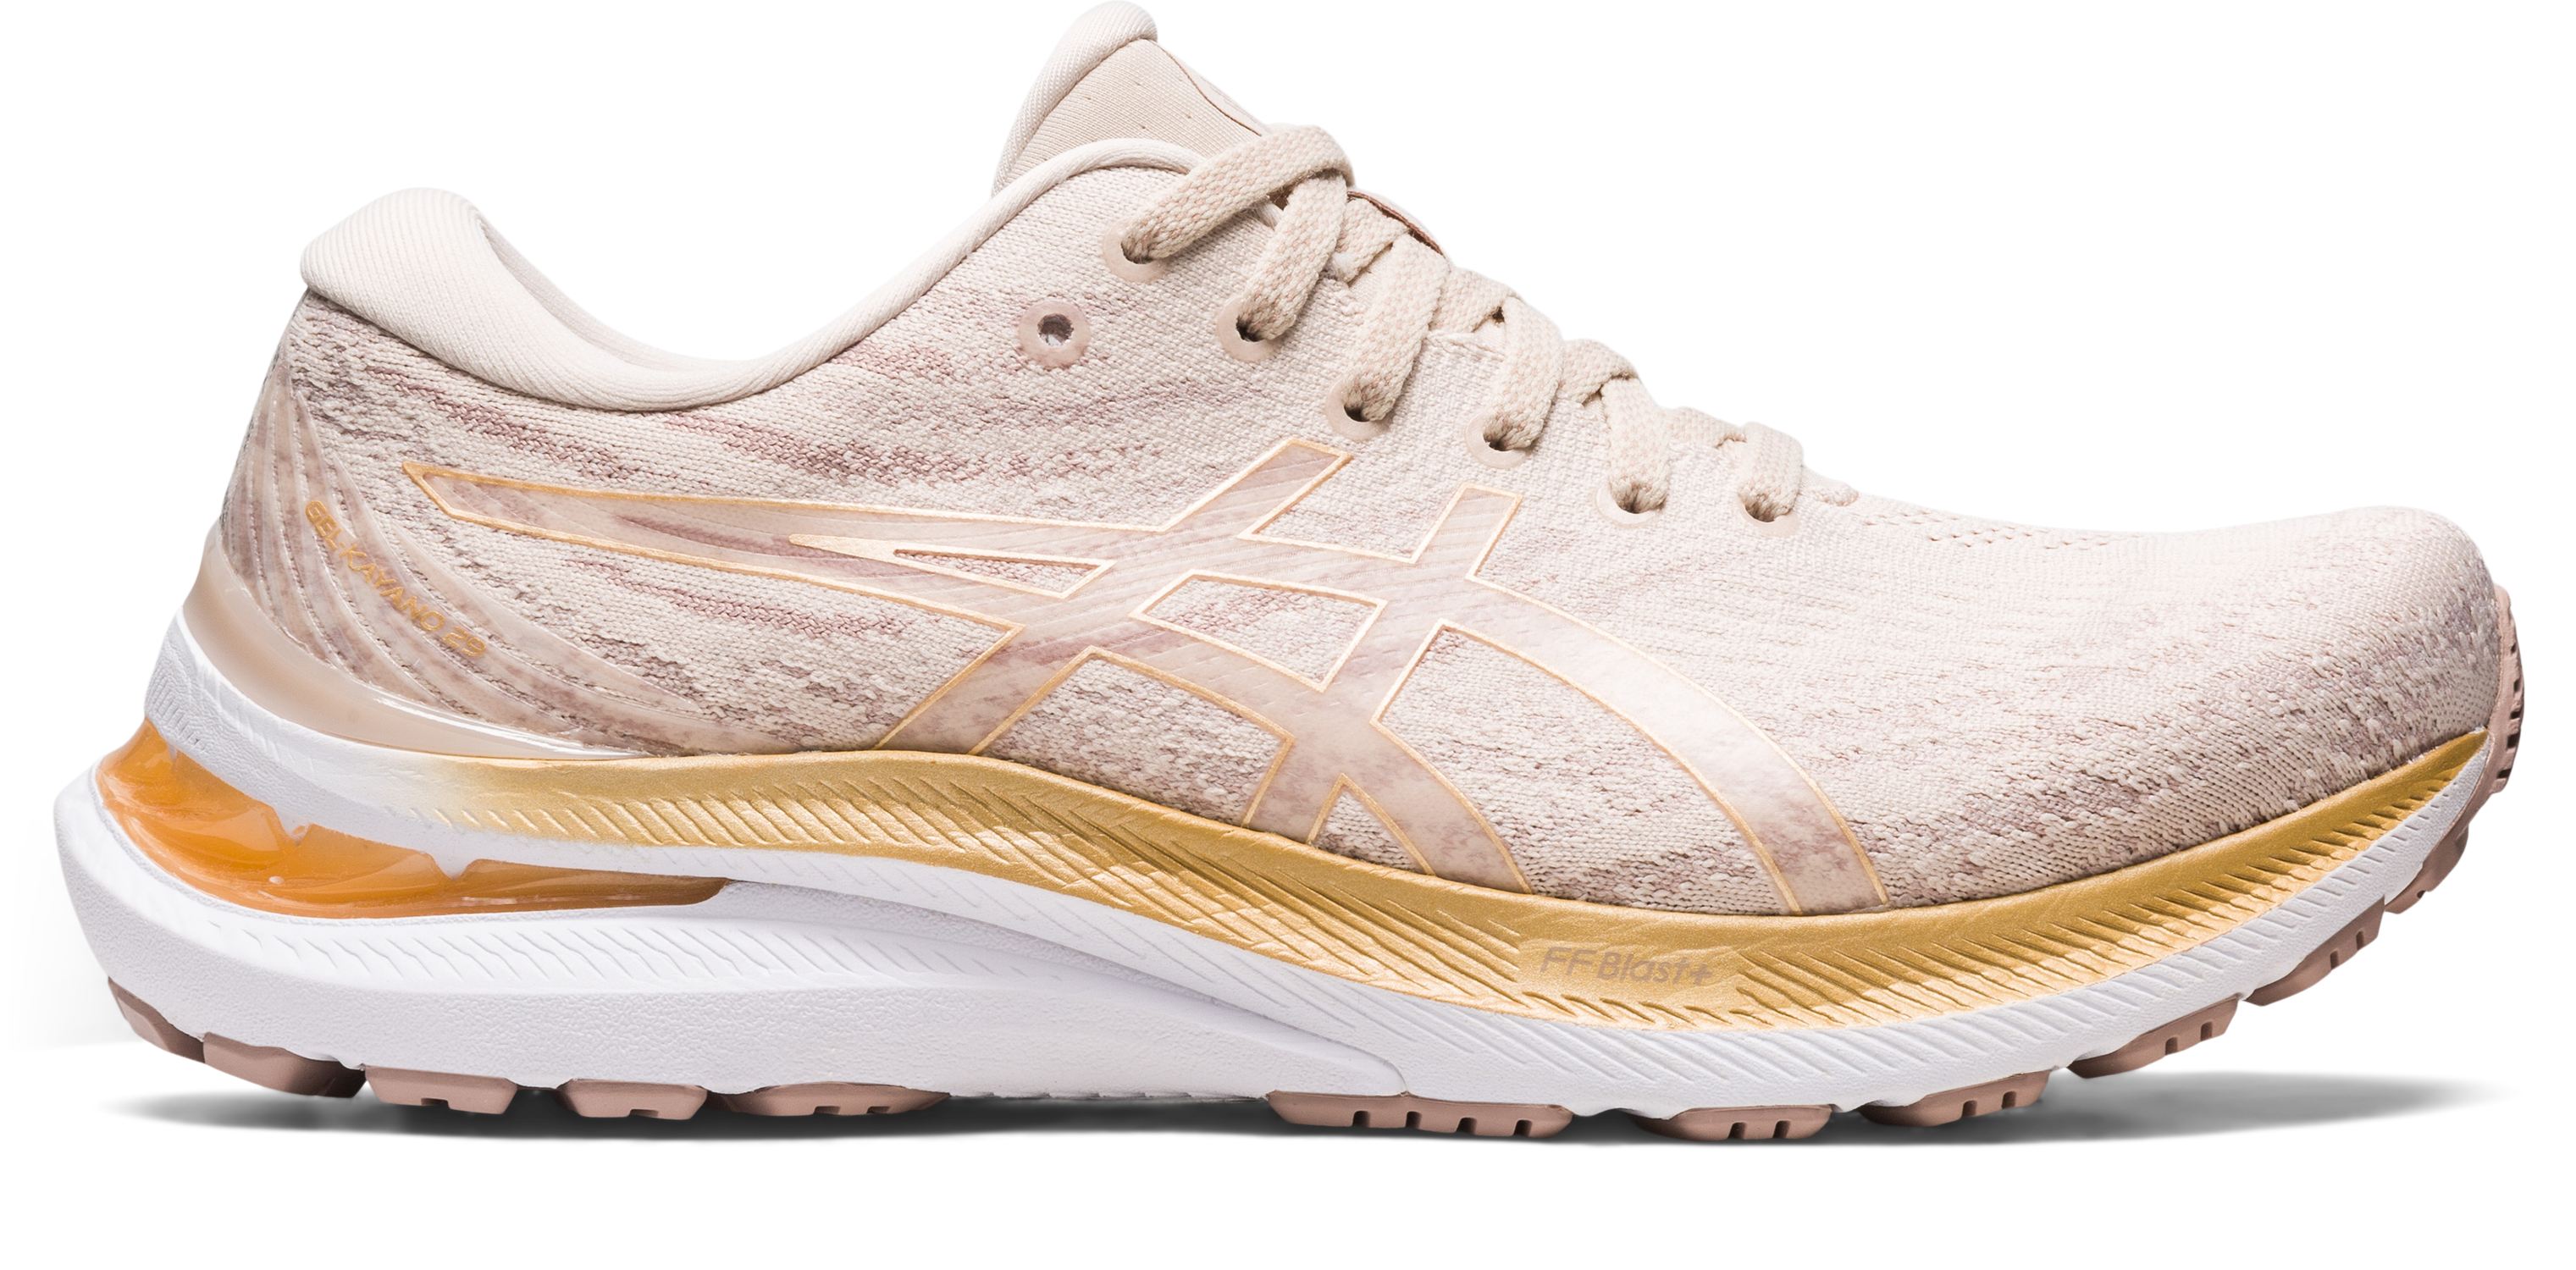 Asics Women's Gel-Kayano 29 Running Shoes in Mineral Beige/Champagne